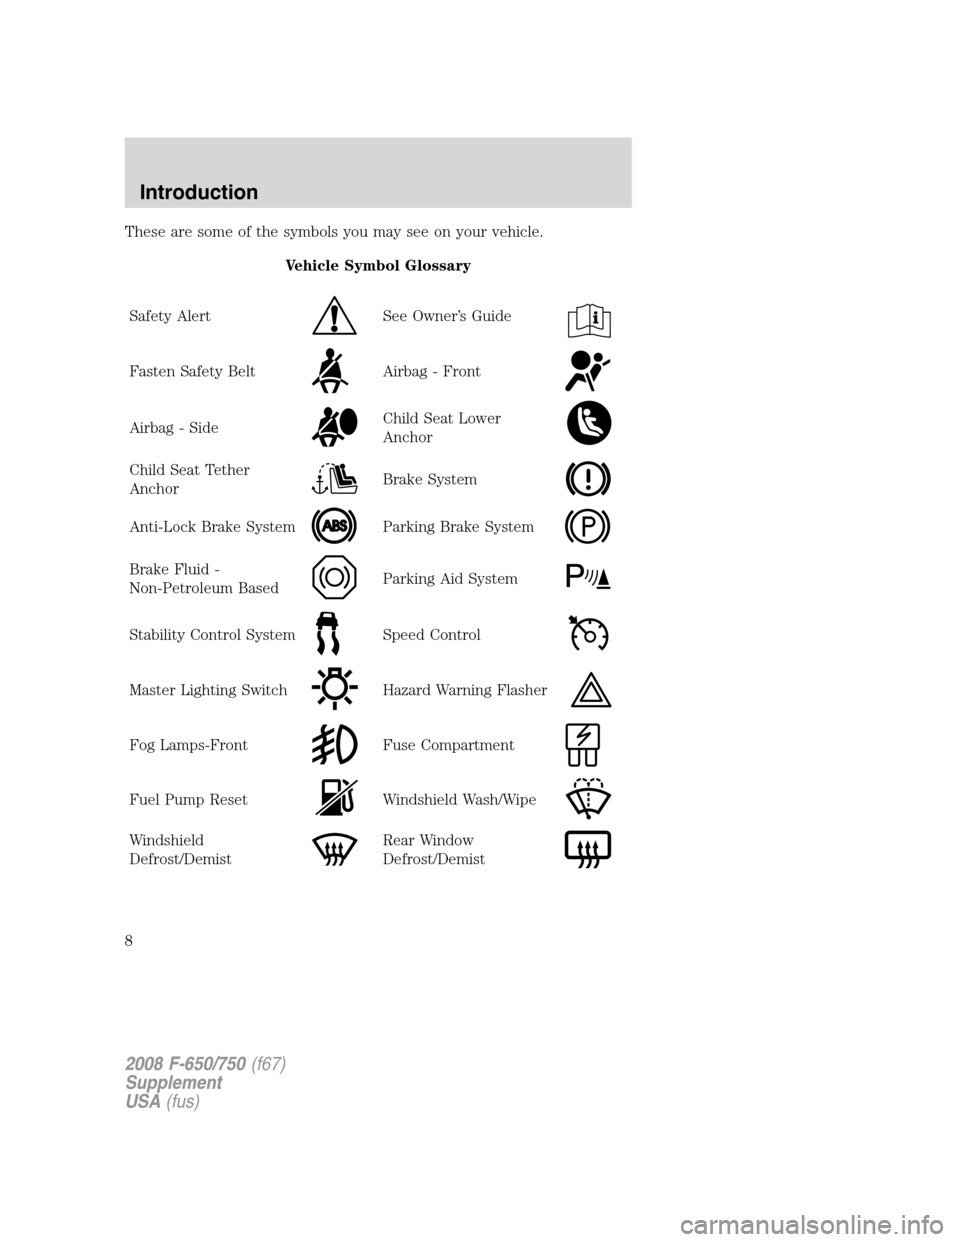 FORD F750 2008 11.G Owners Manual These are some of the symbols you may see on your vehicle.
Vehicle Symbol Glossary
Safety Alert
See Owner’s Guide
Fasten Safety BeltAirbag - Front
Airbag - SideChild Seat Lower
Anchor
Child Seat Tet